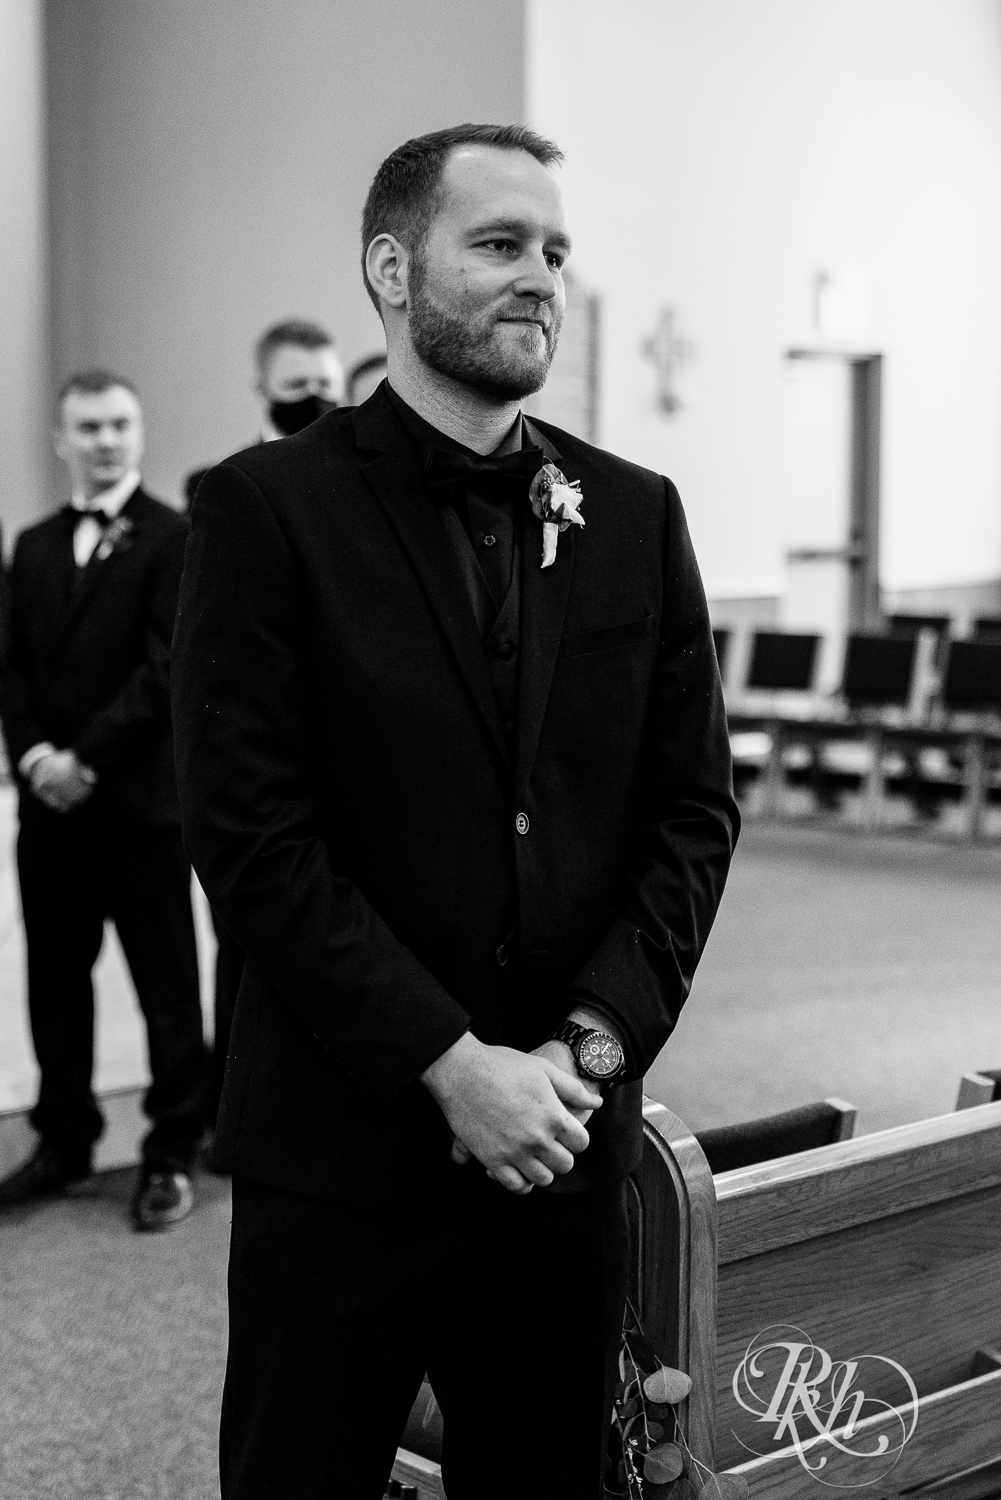 Groom sees bride walk down the aisle with dad in church wedding ceremony in Faribault, Minnesota.